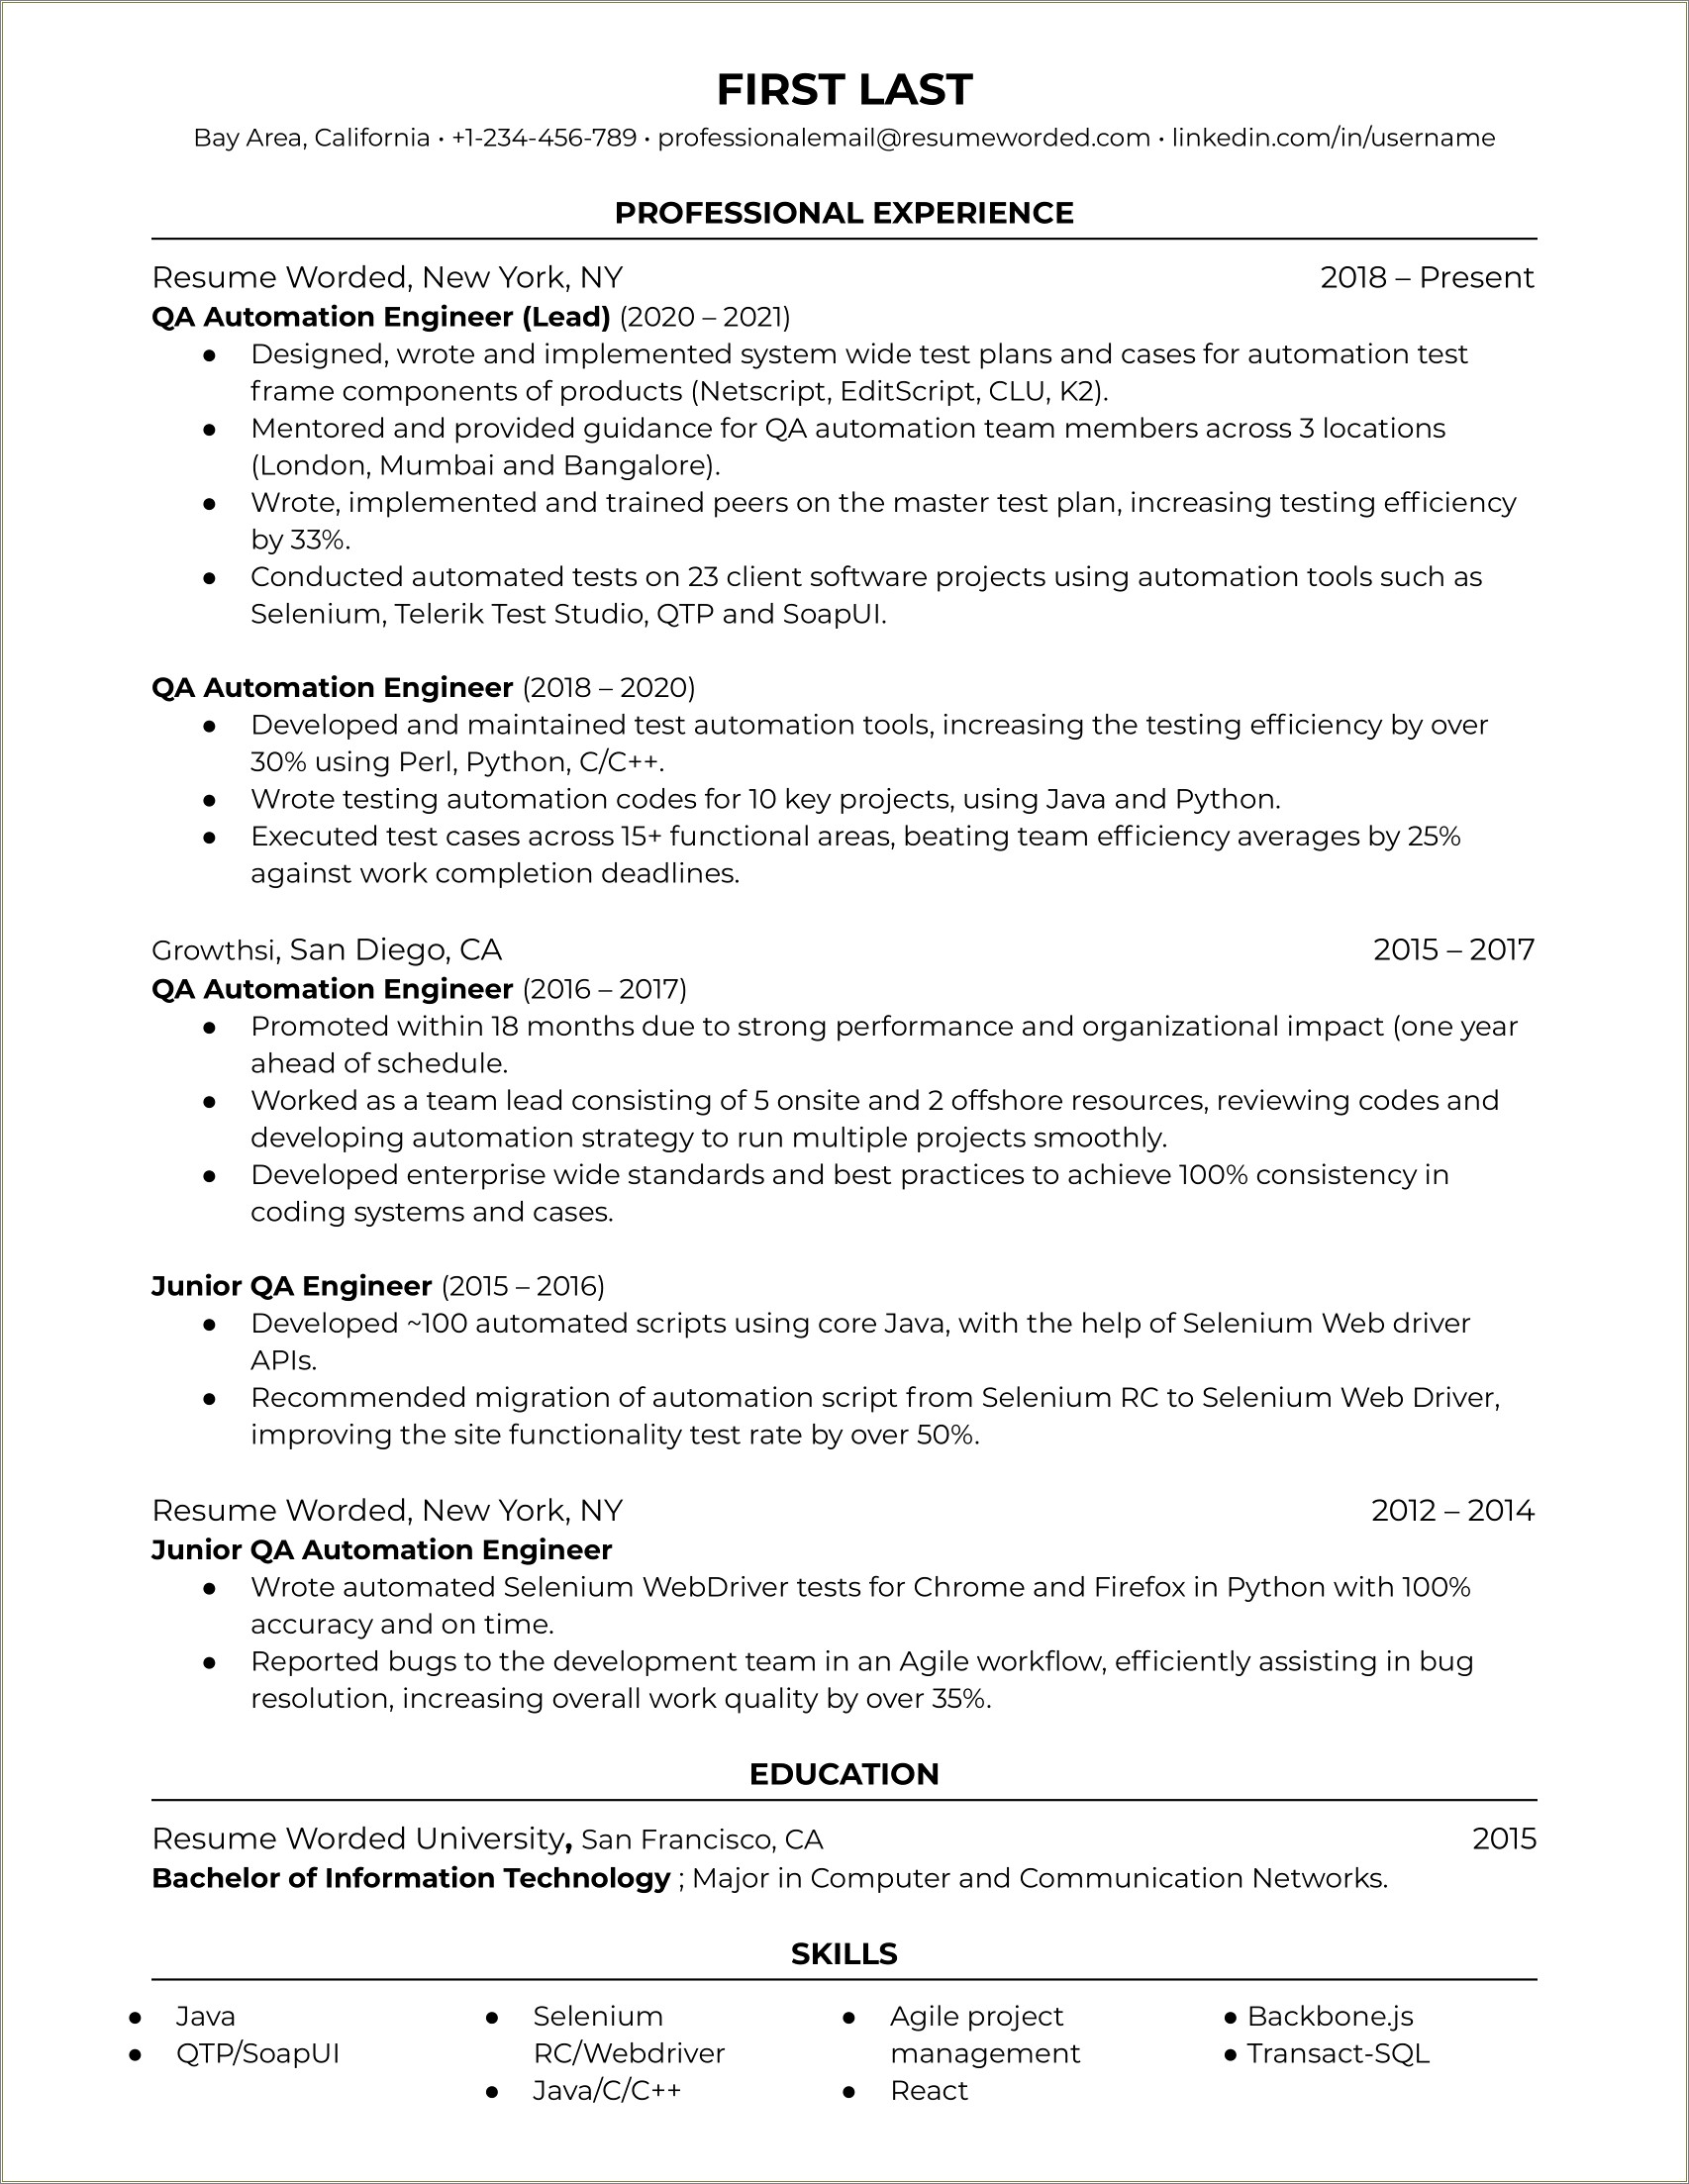 Manual Testing 2 Years Experience Resume Download